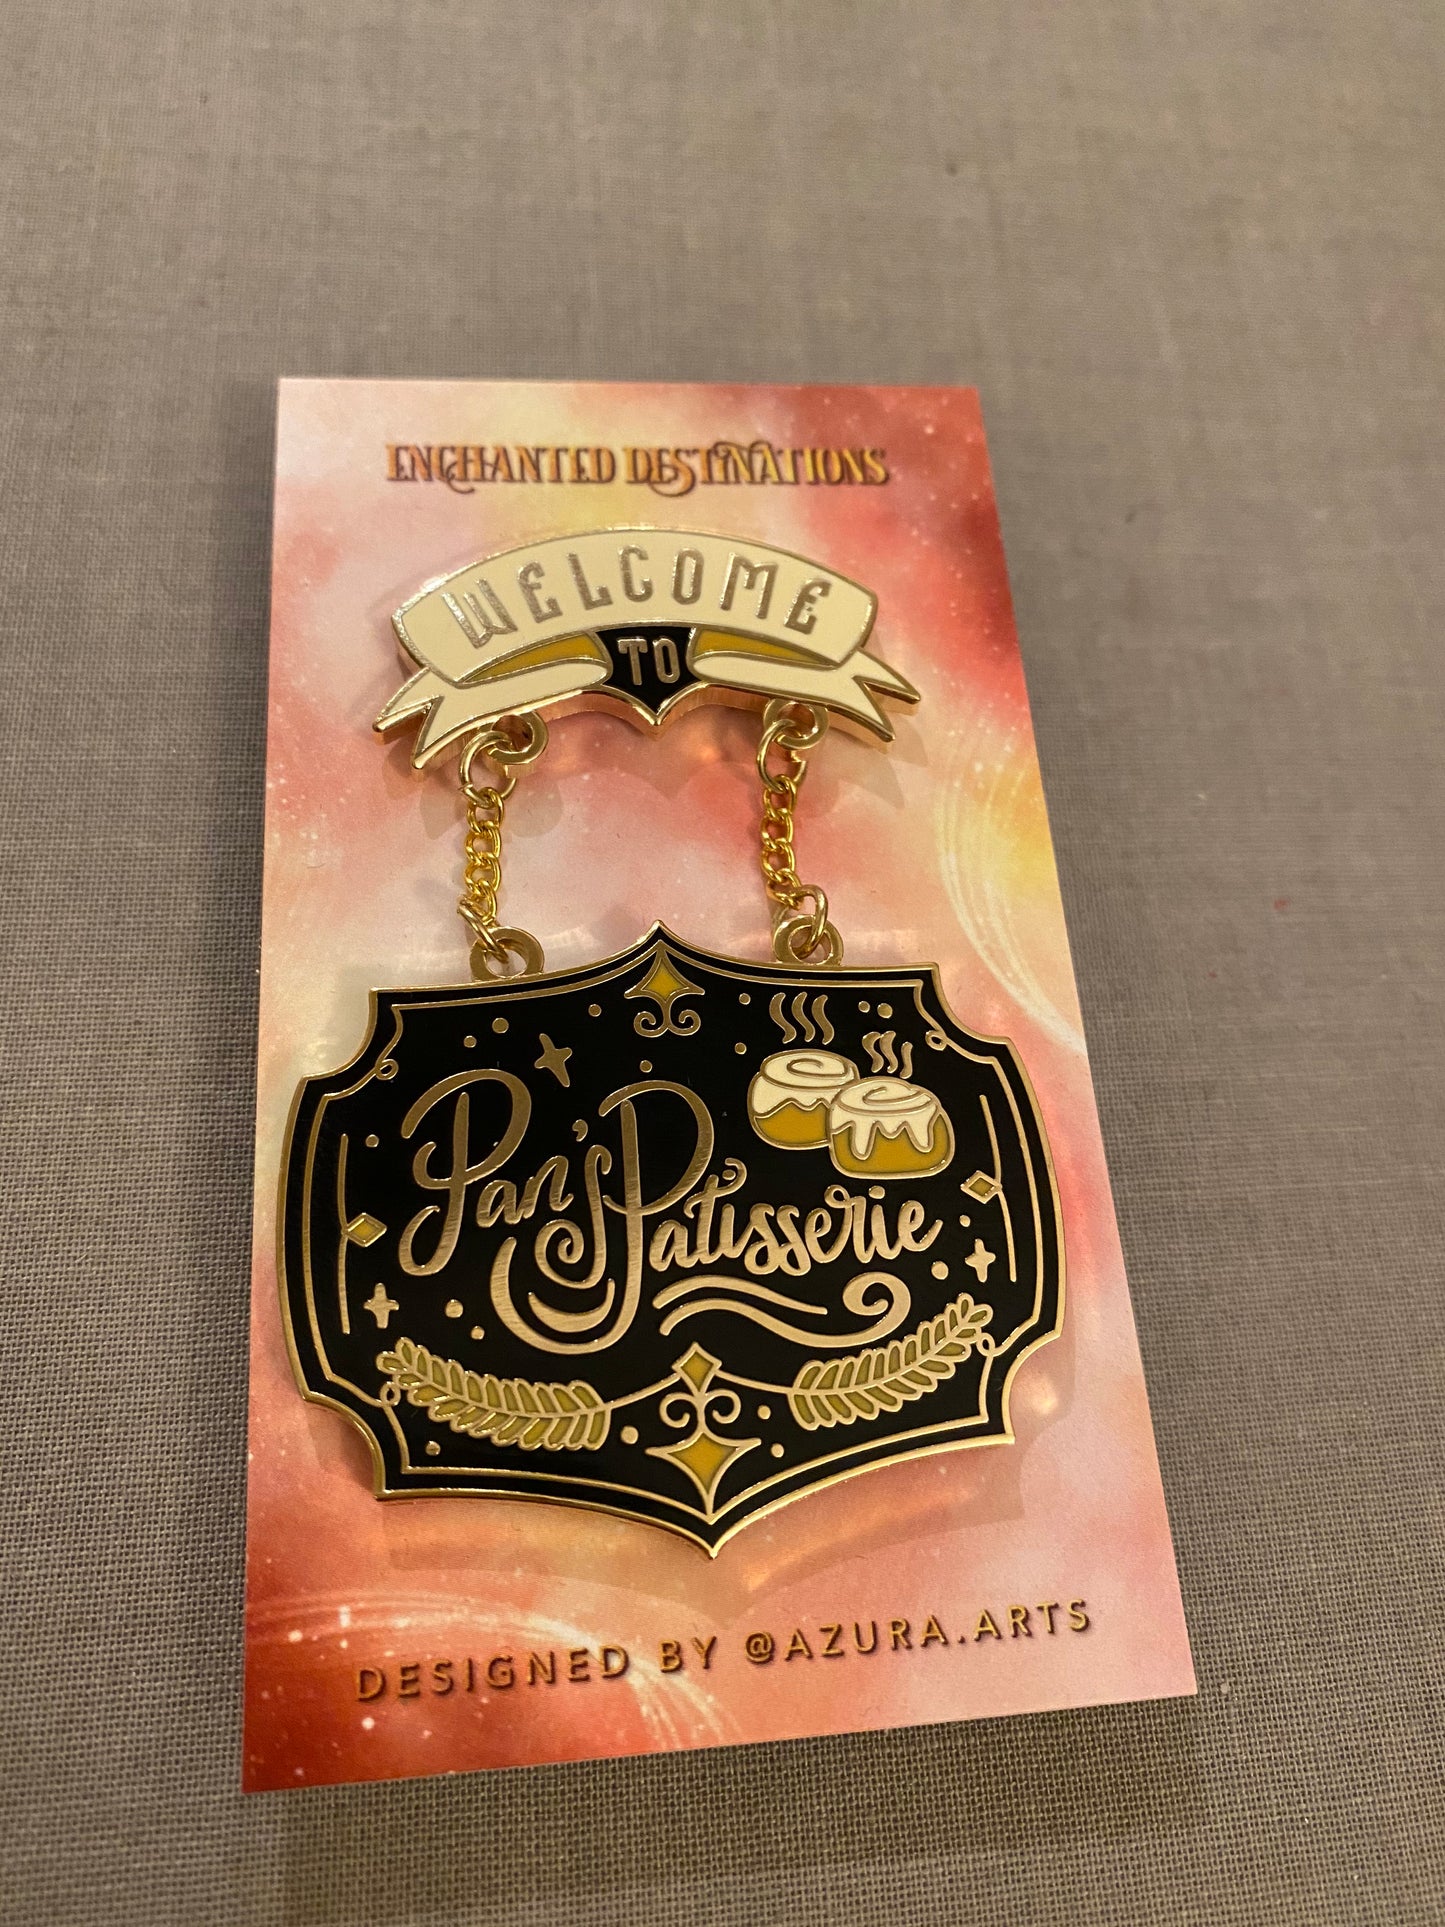 Pan's Patisserie Hanging Sign Enamel Pin Serpent and Dove